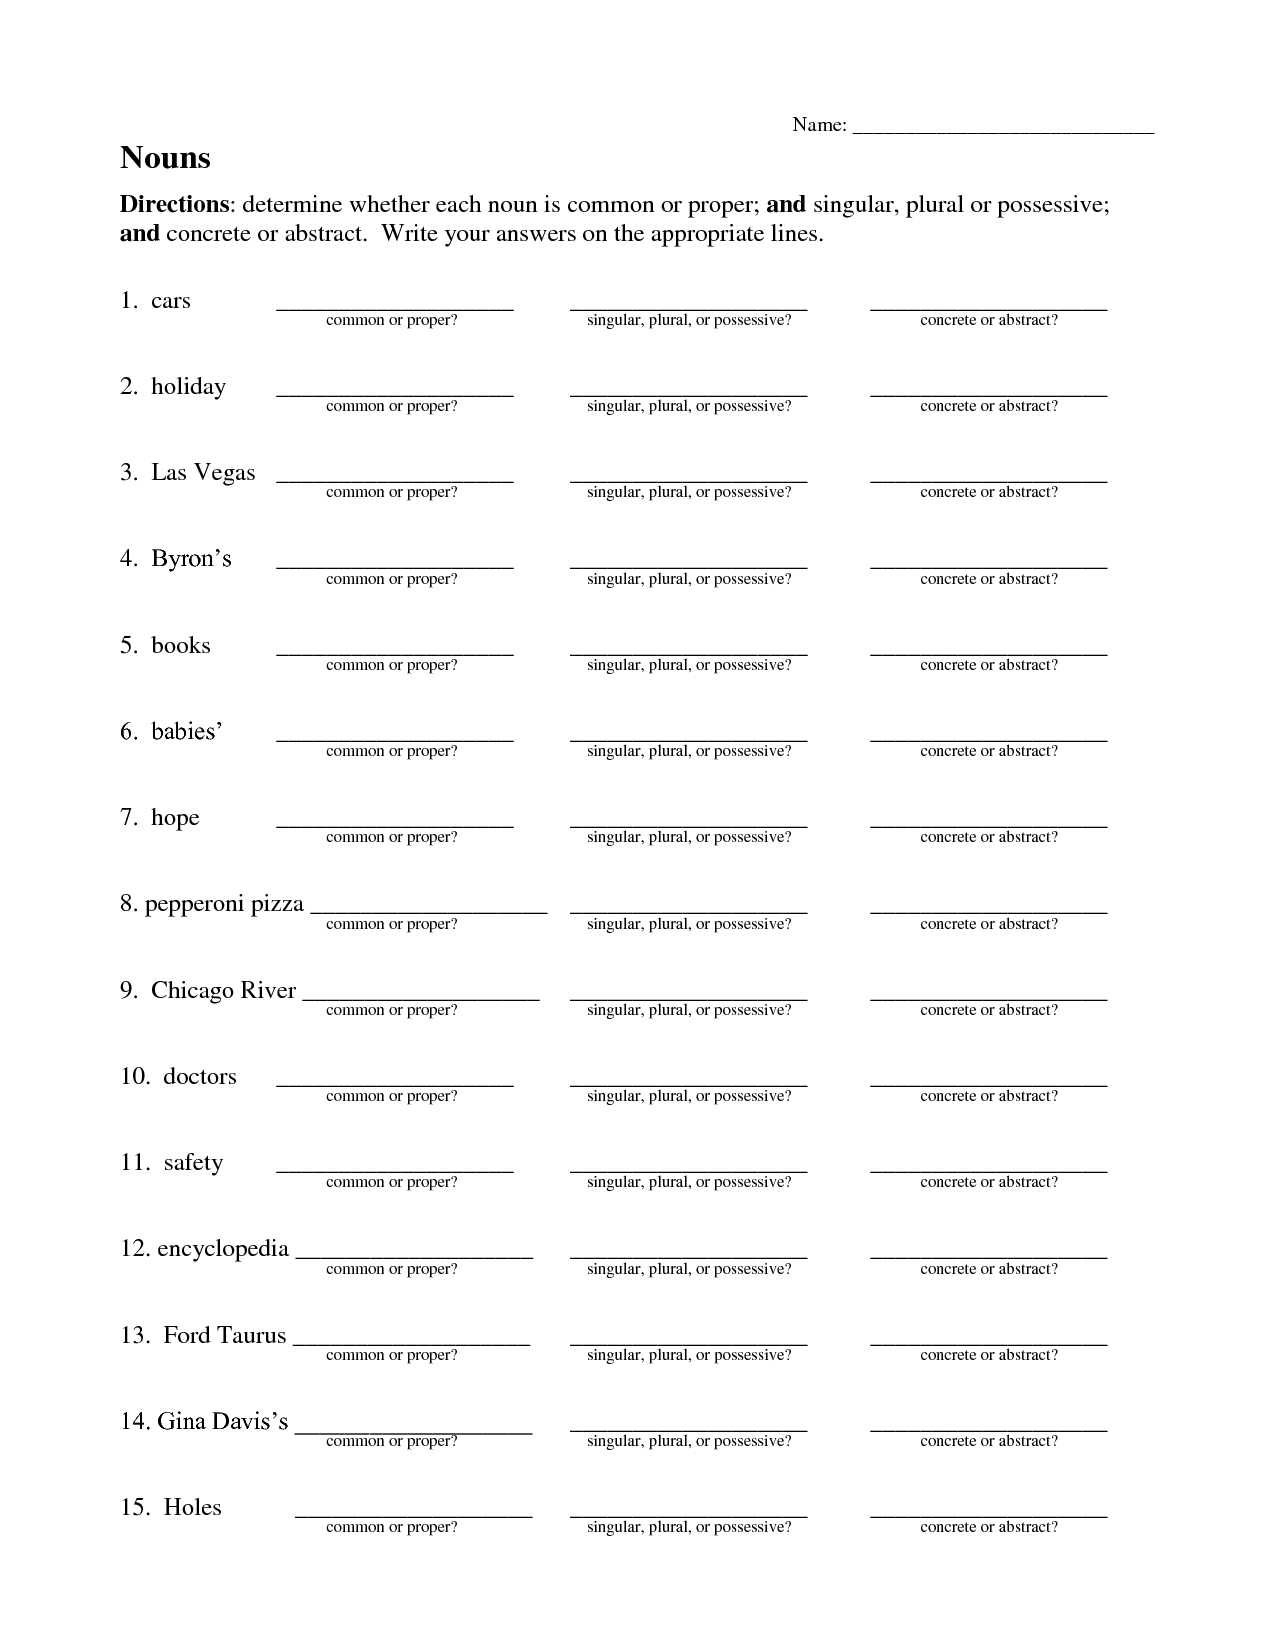 14 Best Images of Personal Development Worksheet - Character